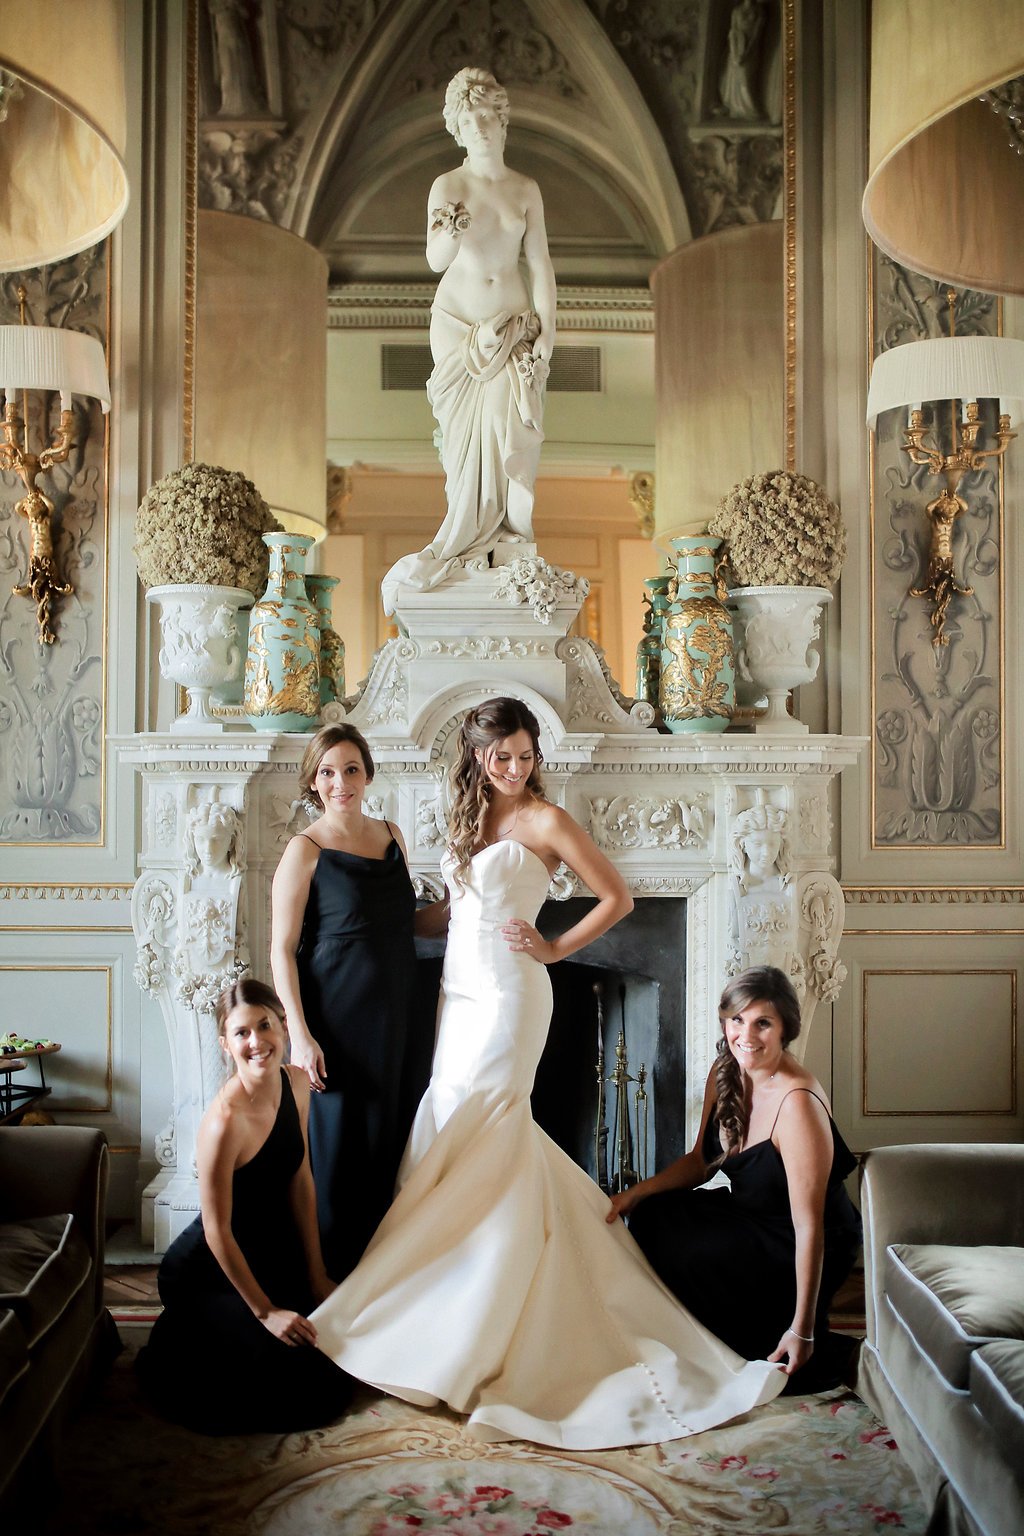 michellegaribayevents.com | Michelle Garibay Events and Design | Destination and Southern California Wedding Planner | Villa Cora Florence Italy Weddings   (7).jpg